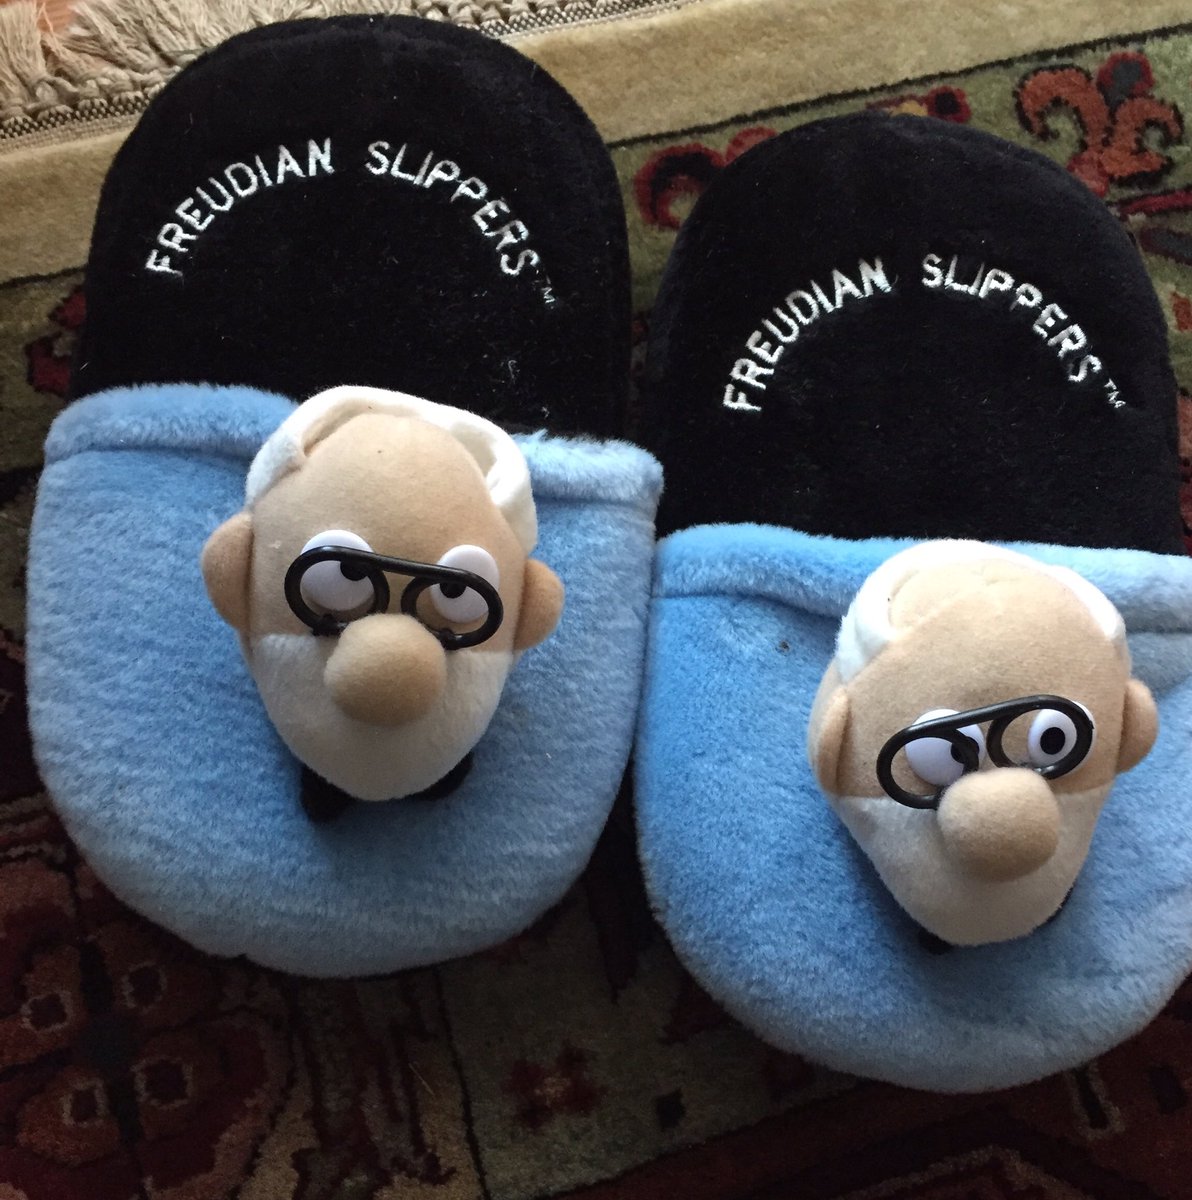 Taylor Glenn™️ X: "Found my Slippers in my parents' attic. Made so neurotic! I mean nostalgic. #alabamachristmas https://t.co/2B3M3DHXp3" / X